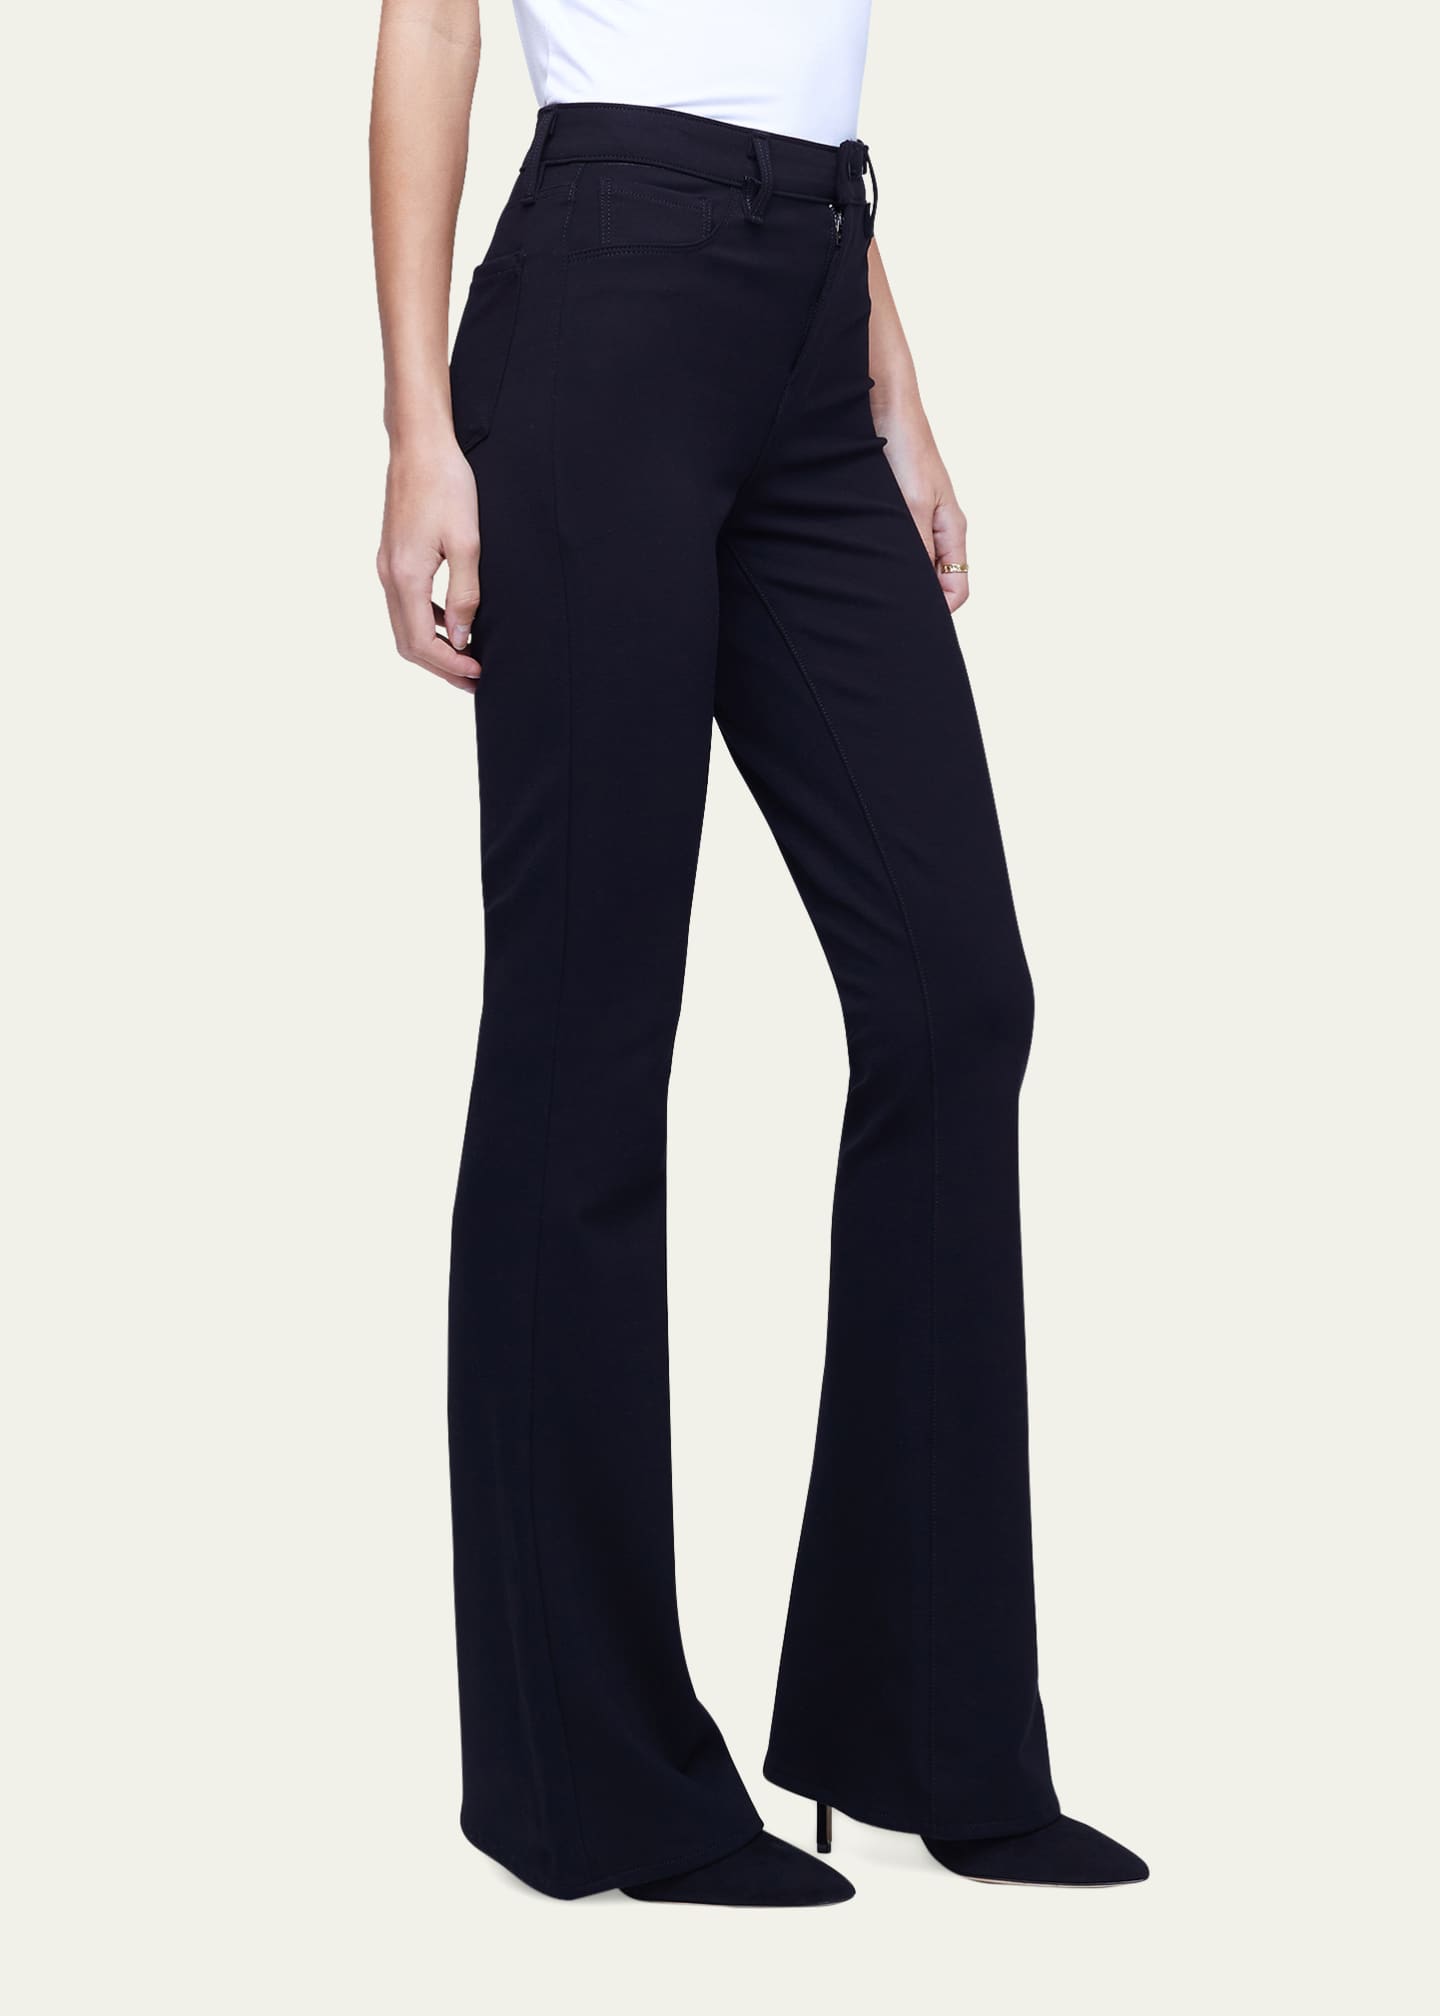 L'Agence Marty High Rise Flare Jeans - Bergdorf Goodman